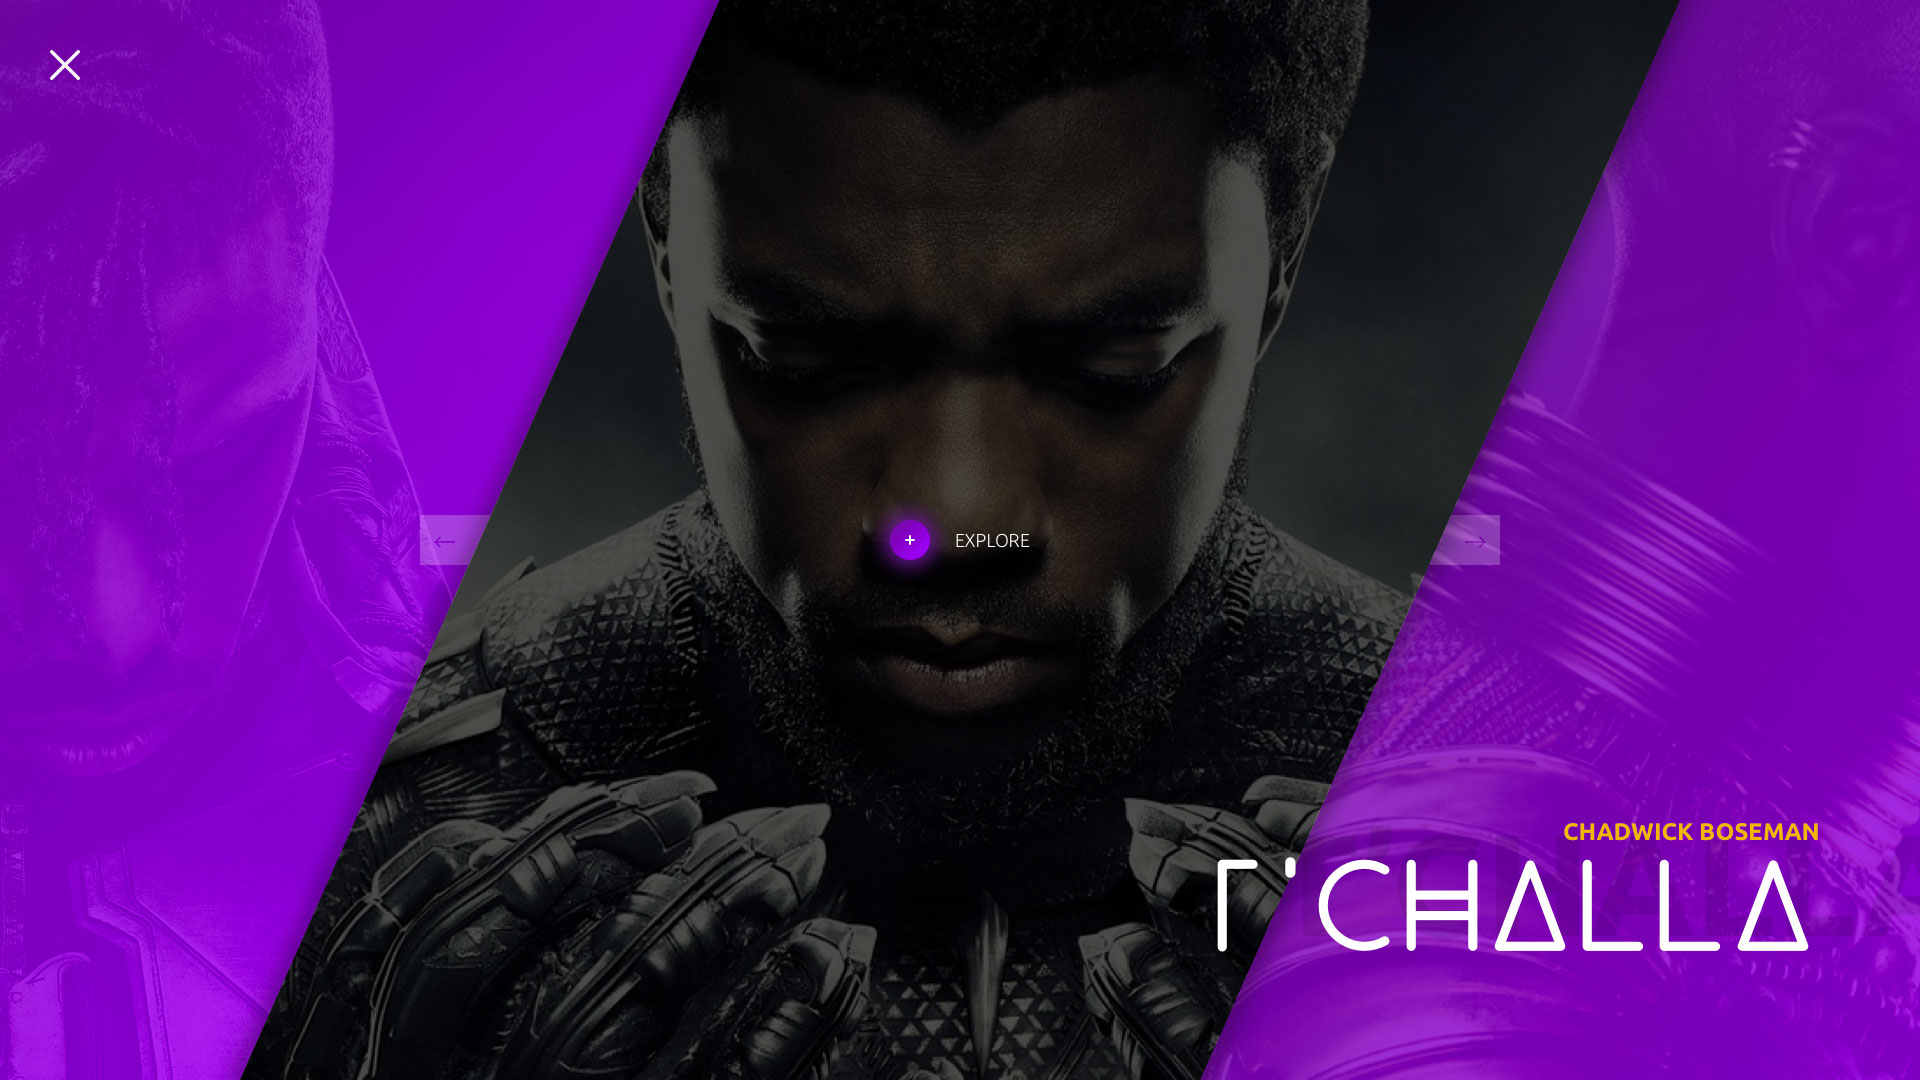 black panther web site characters cast gallery tchalla hover design mockup